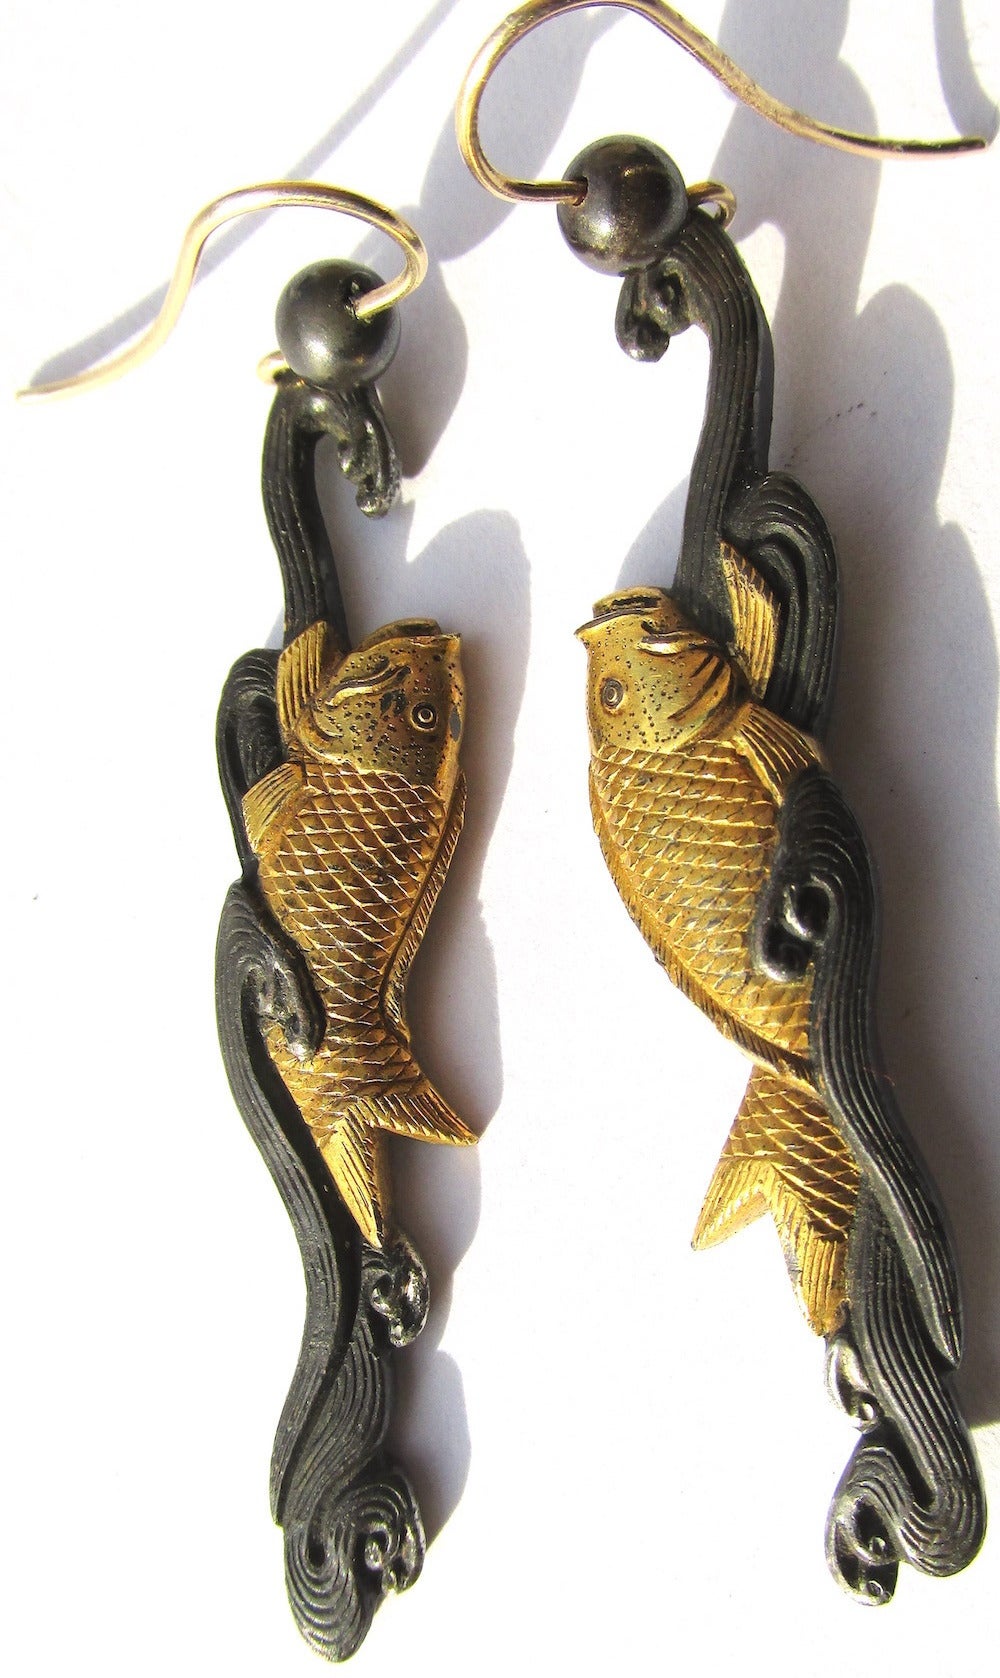 Charming Victorian Japanese Shakudō  earrings with a dangling fish. The high gold content in Shakudo objects when treated with copper forms an indigo/black patina resembling lacquer. Historically Shakudō was used in Japan to construct or decorate